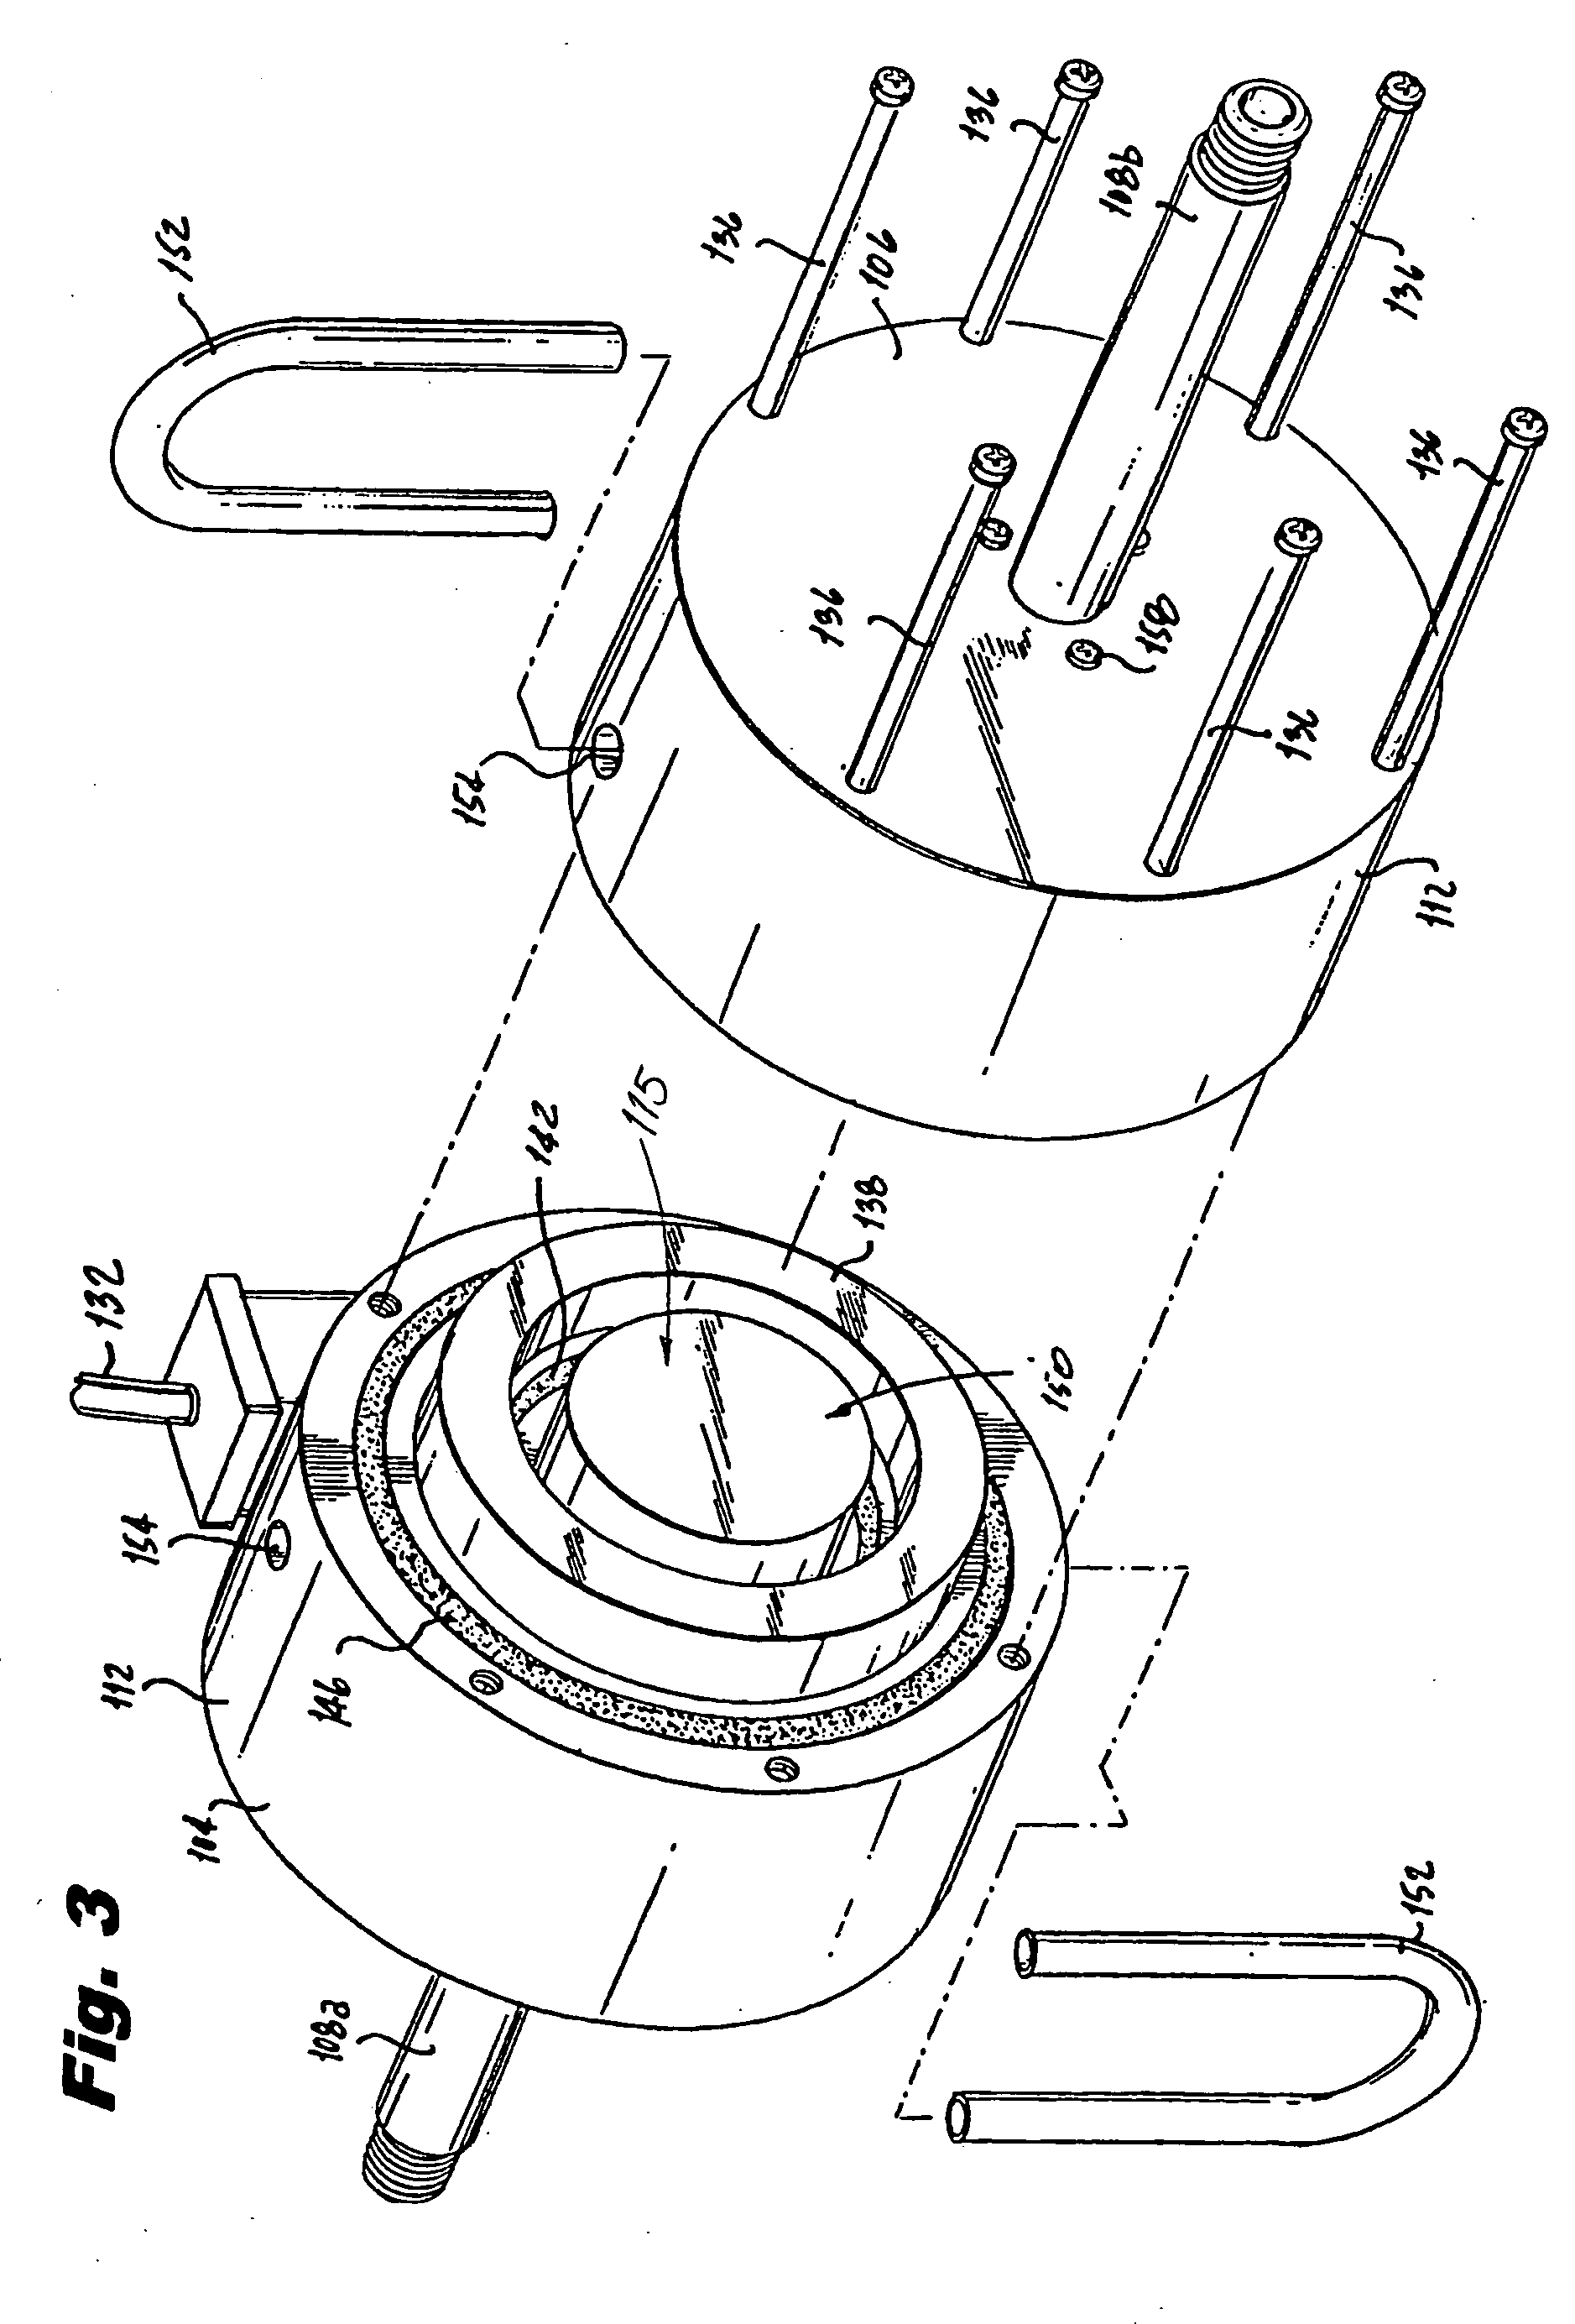 Coriolis effect mass flow meter and gyroscope